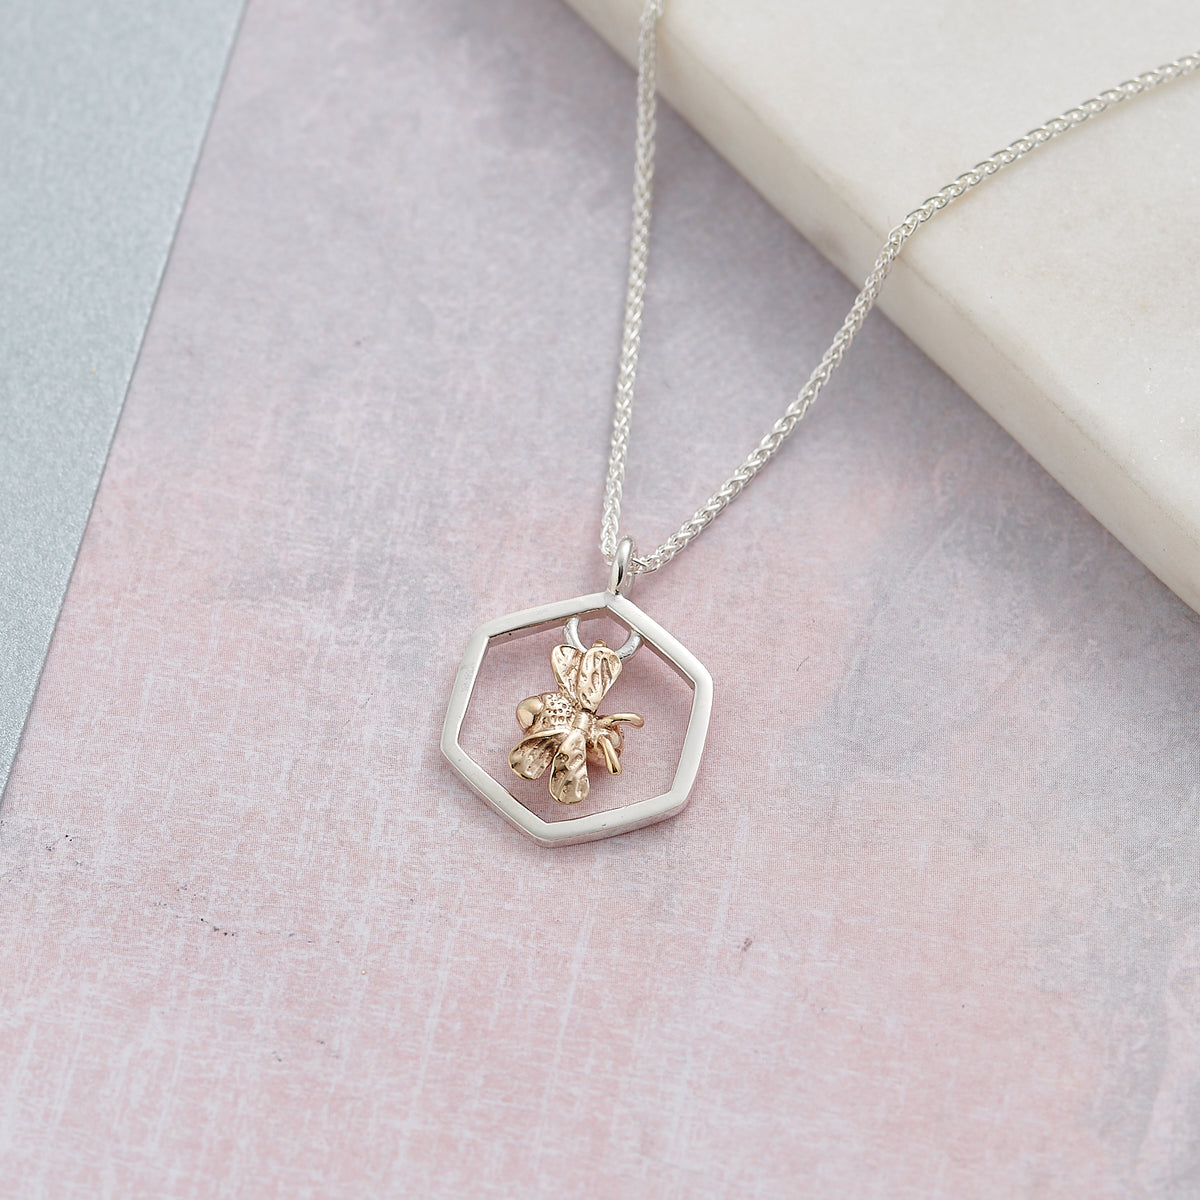 Tiny silver and gold honey bumble bee necklace scarlett jewellery